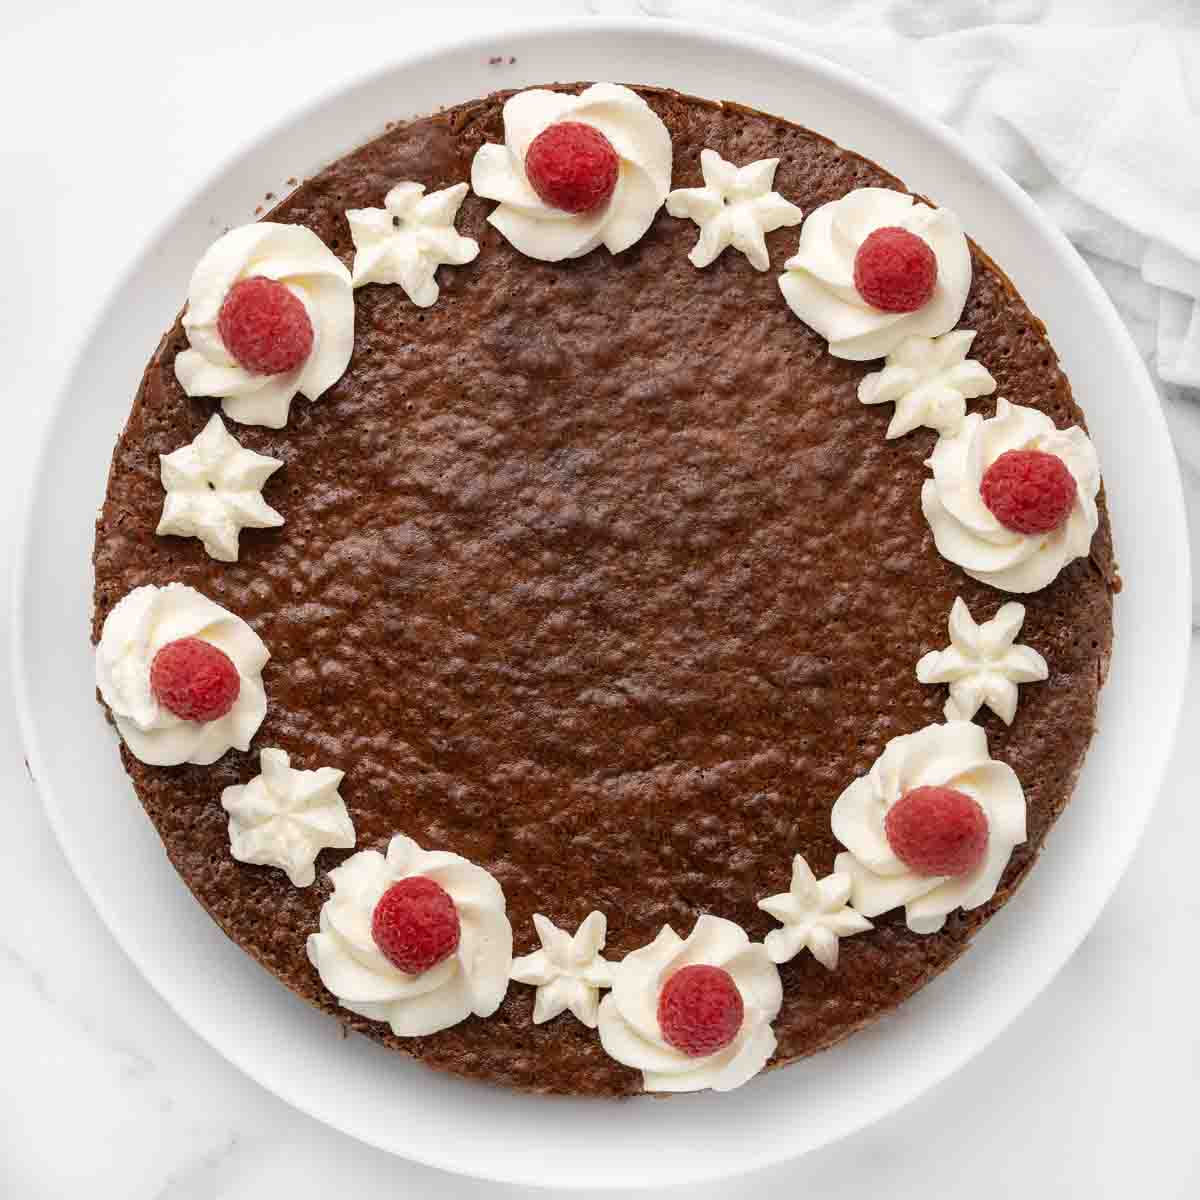 whole decorated flourless chocolate cake on a white platter